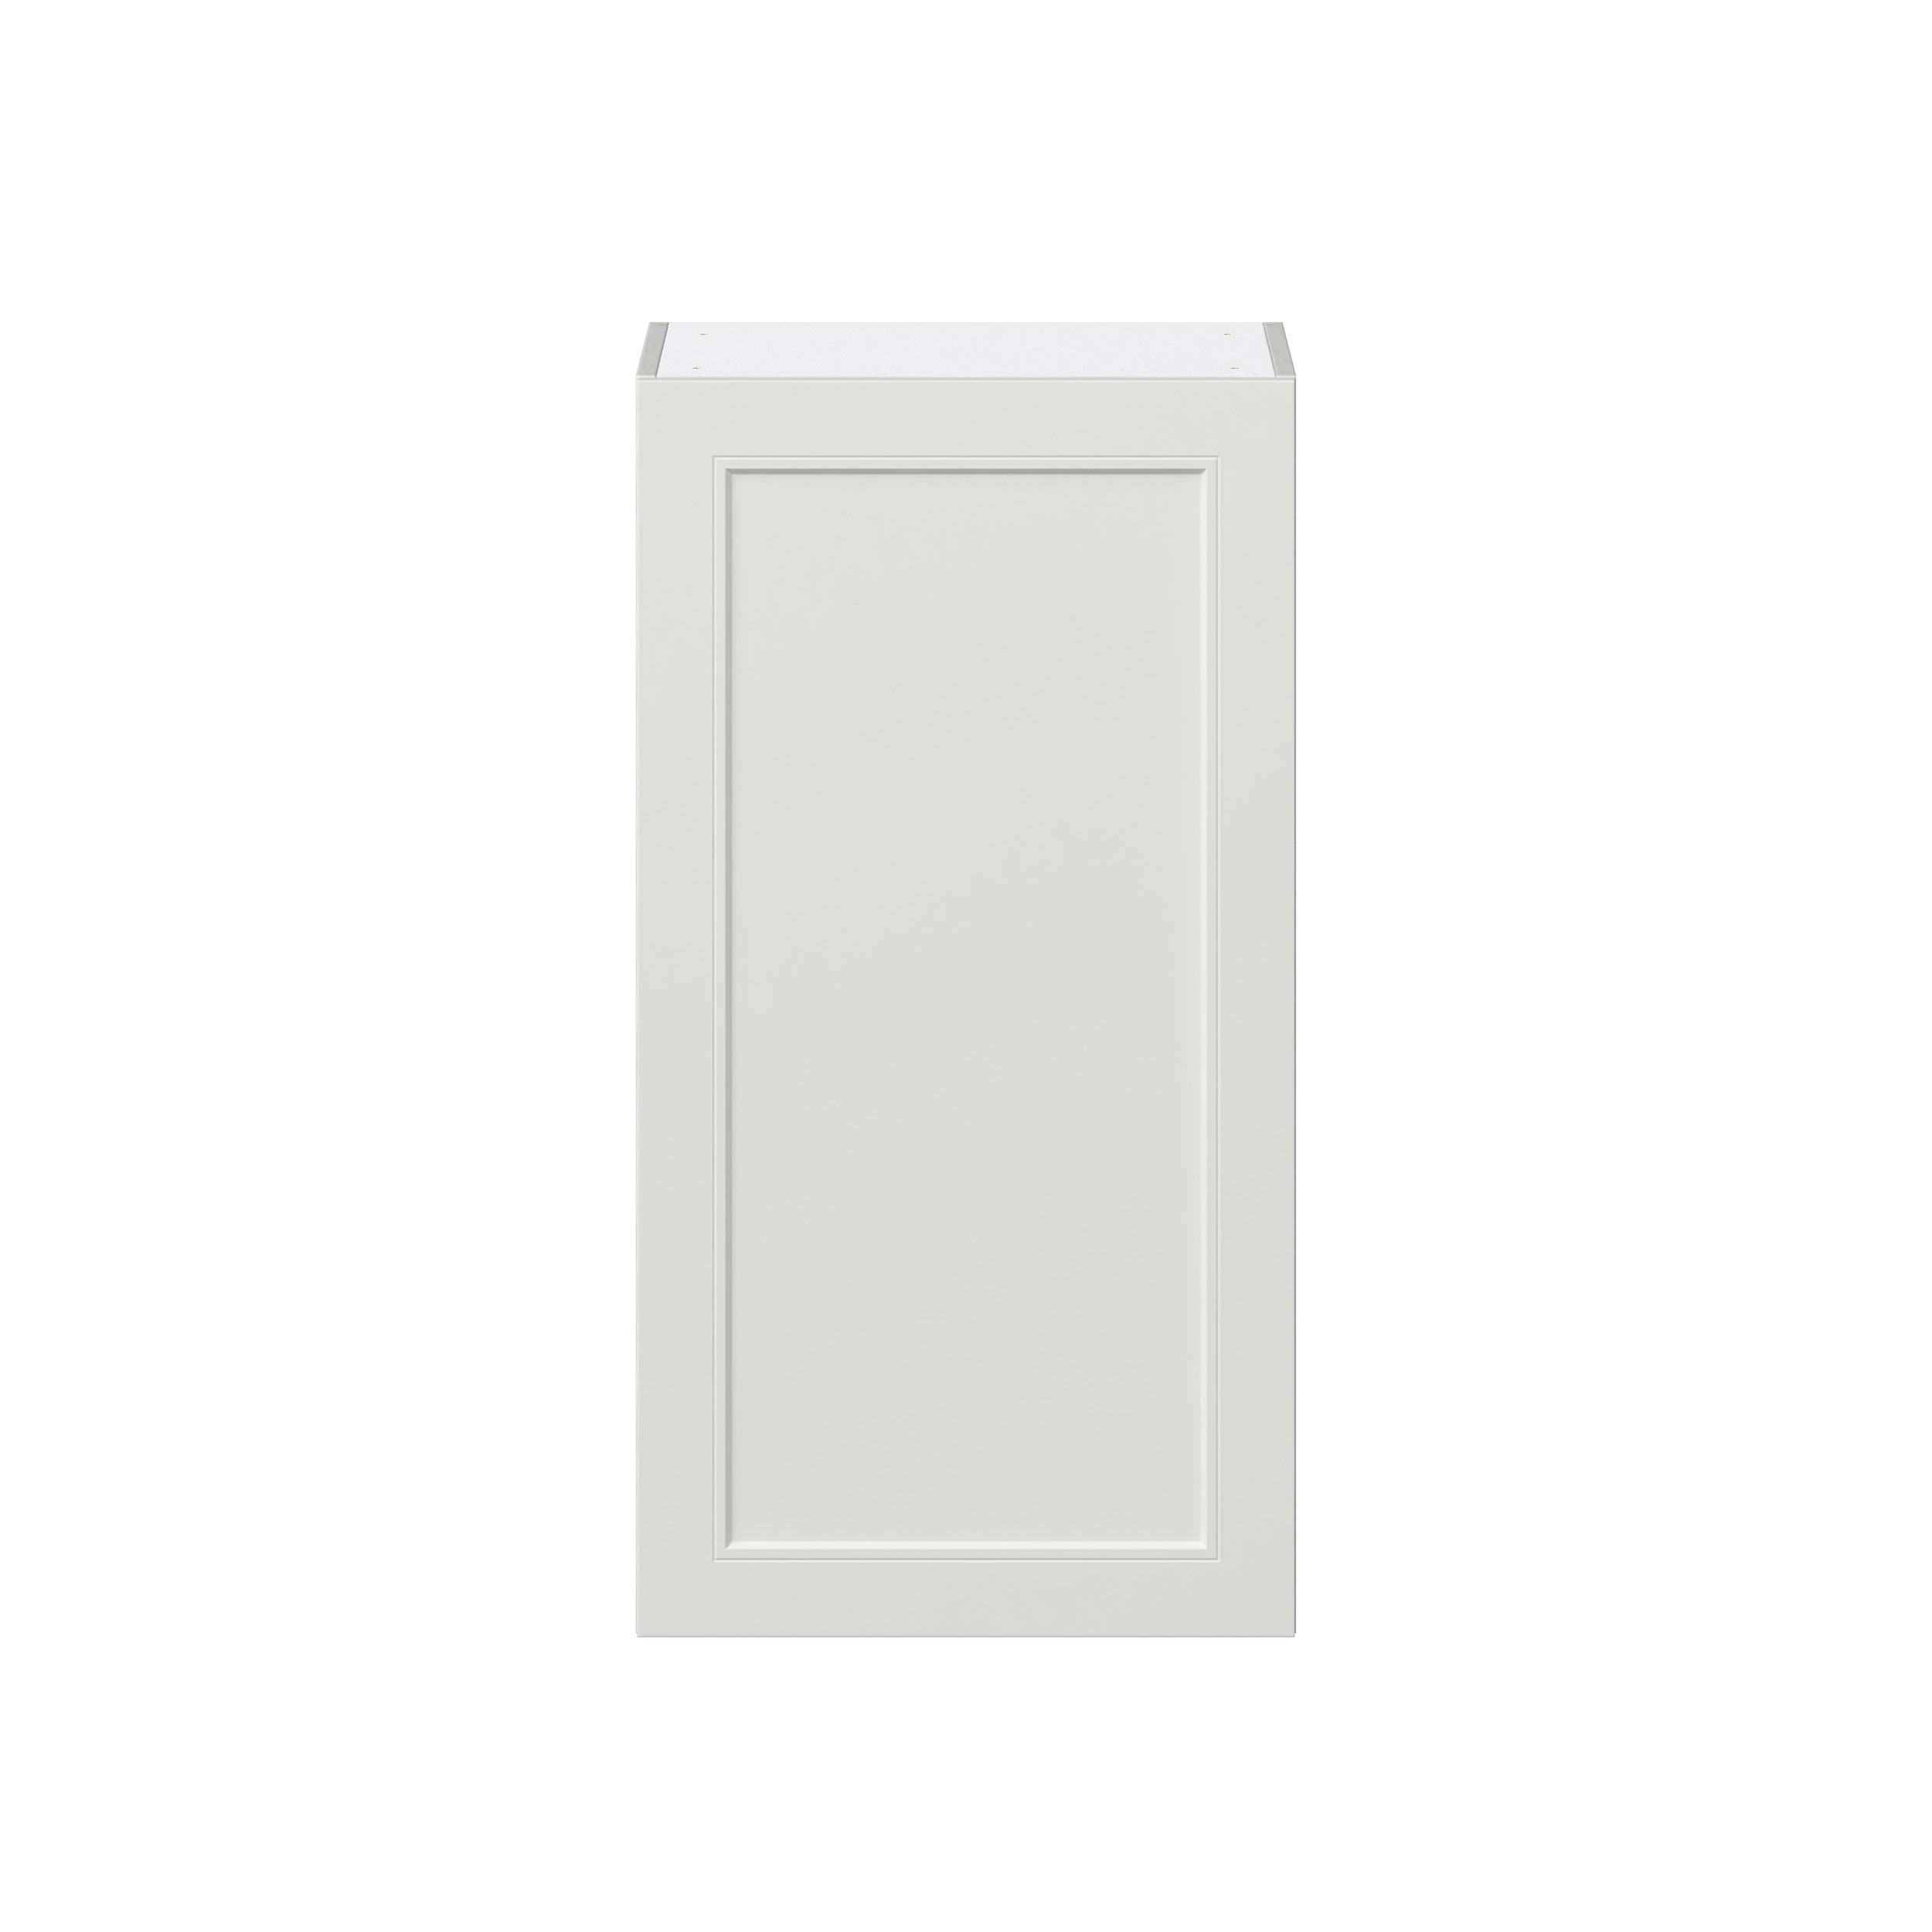 Wisteria Painted Light Gray Recessed Assembled Wall Cabinet with Full High Door (21 in. W x 40 in. H x 14 in. D)